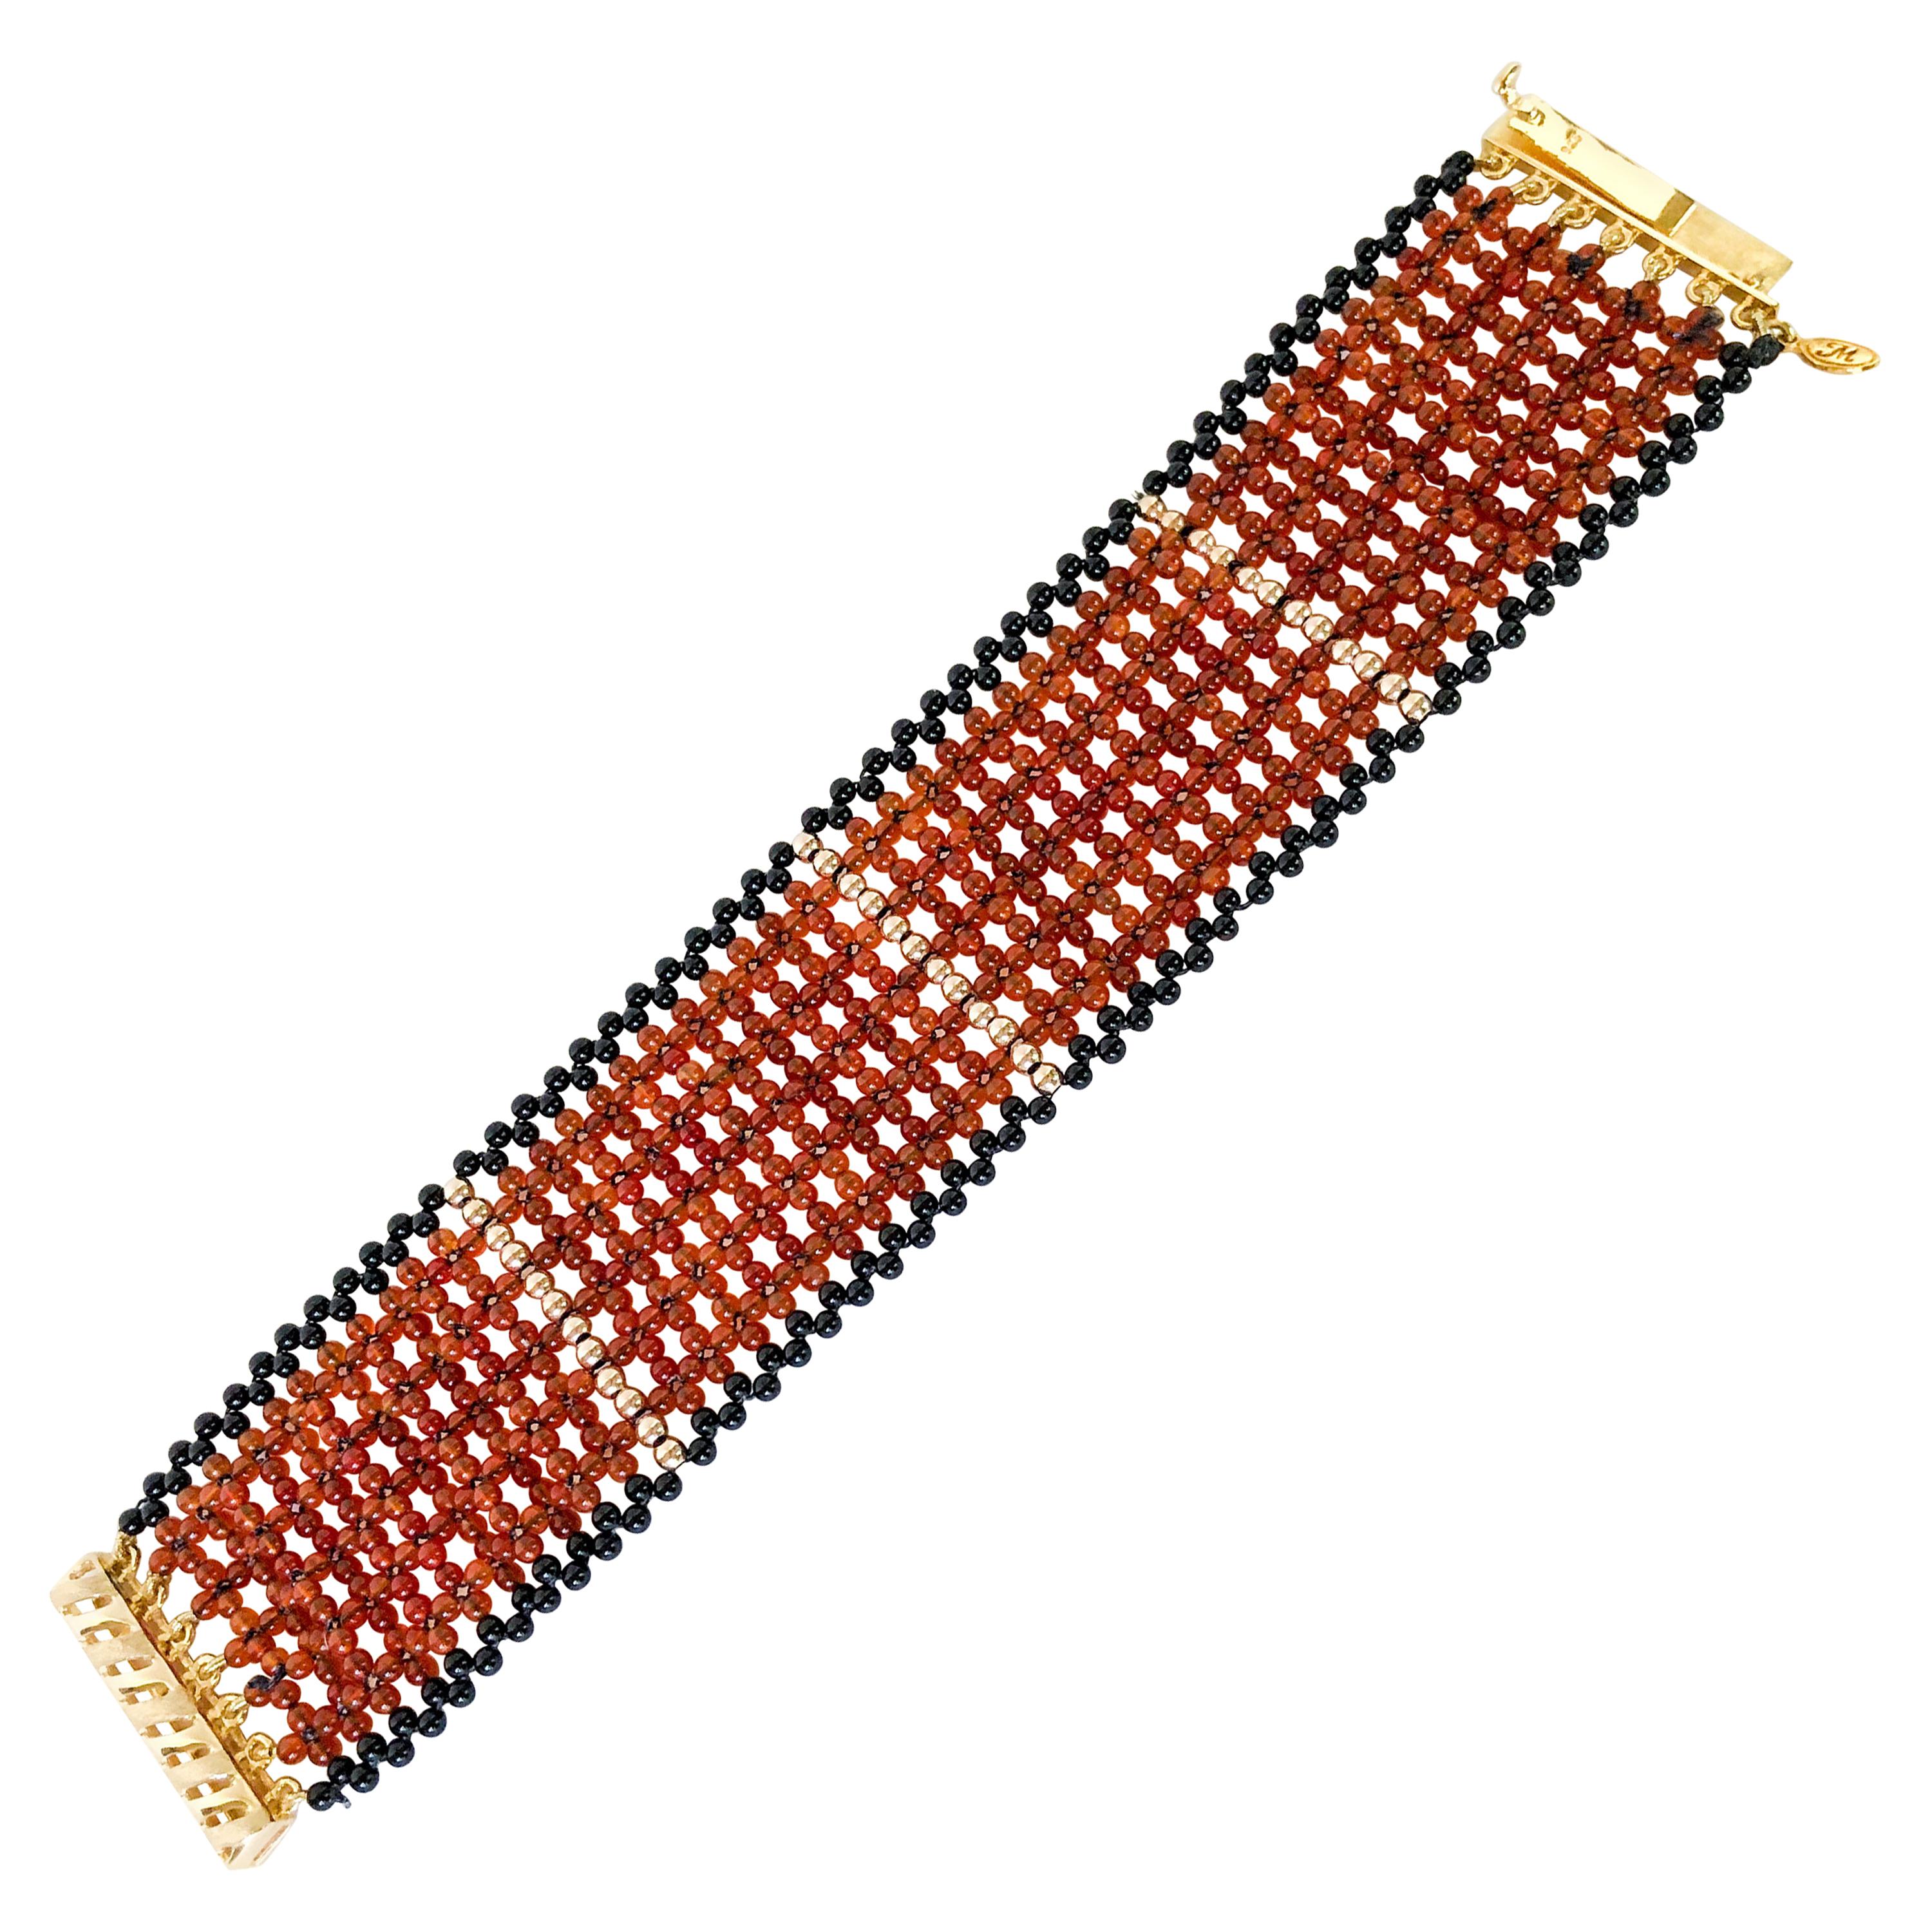 Marina J Carnelian, Gold, and Onyx Beads Wide Woven Bracelet with Vermeil clasp